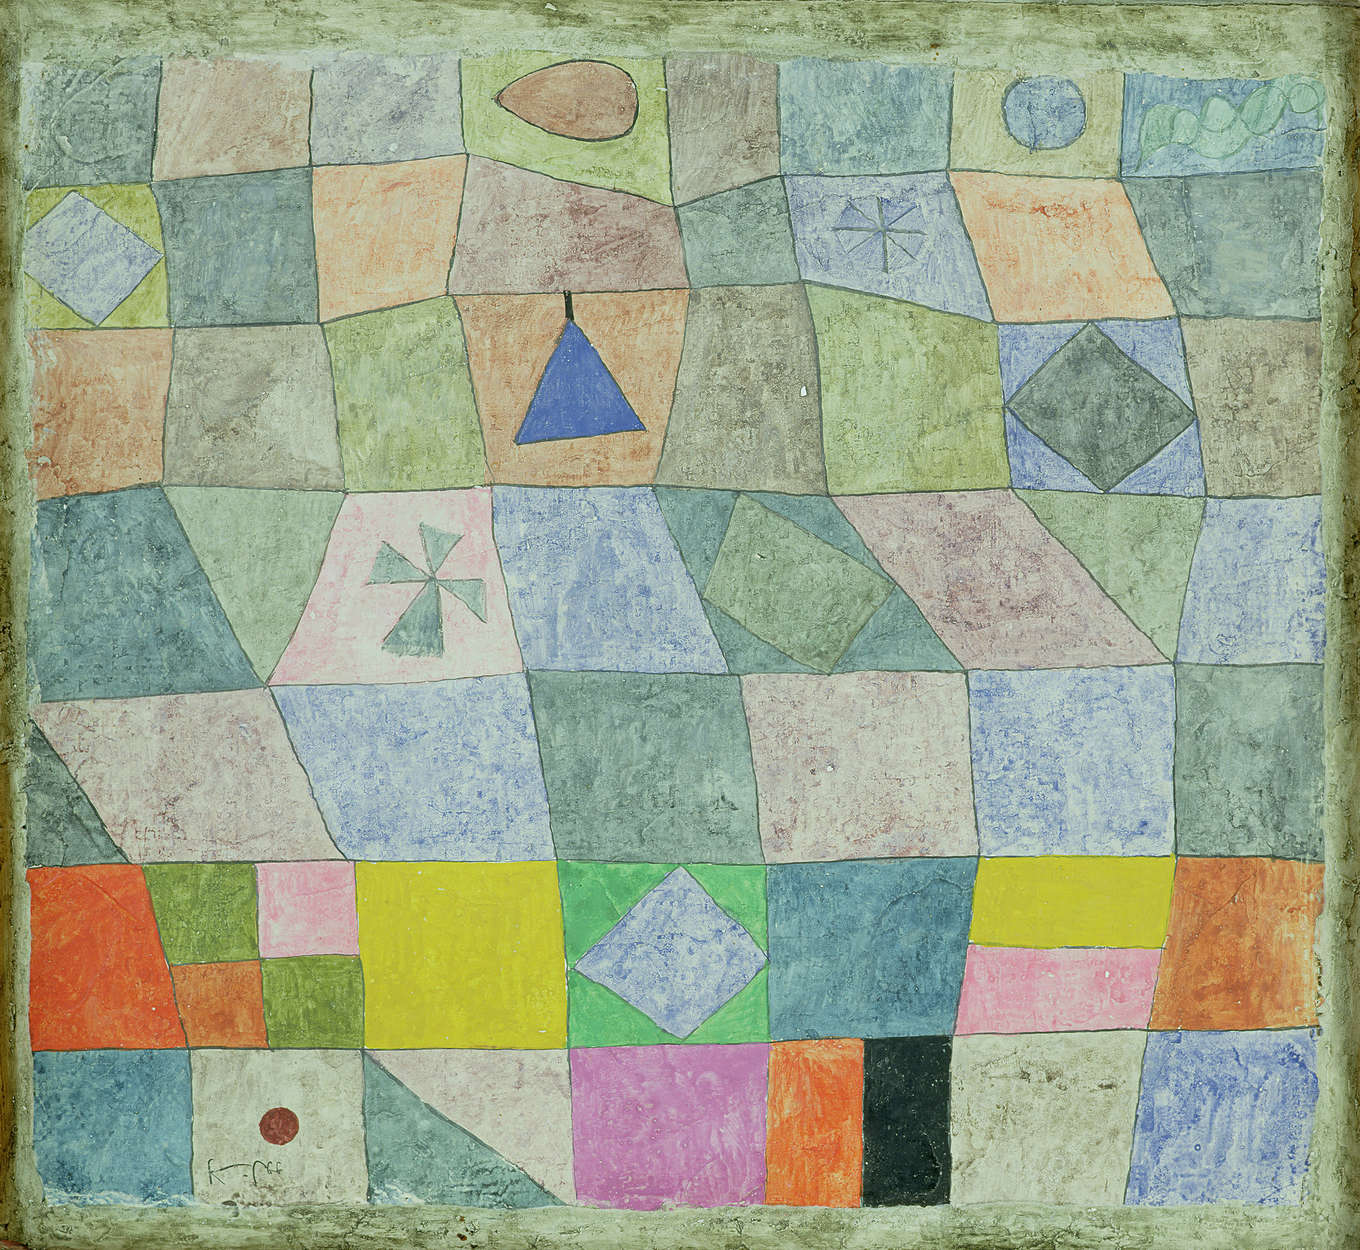             Photo wallpaper "Friendly game" by Paul Klee
        